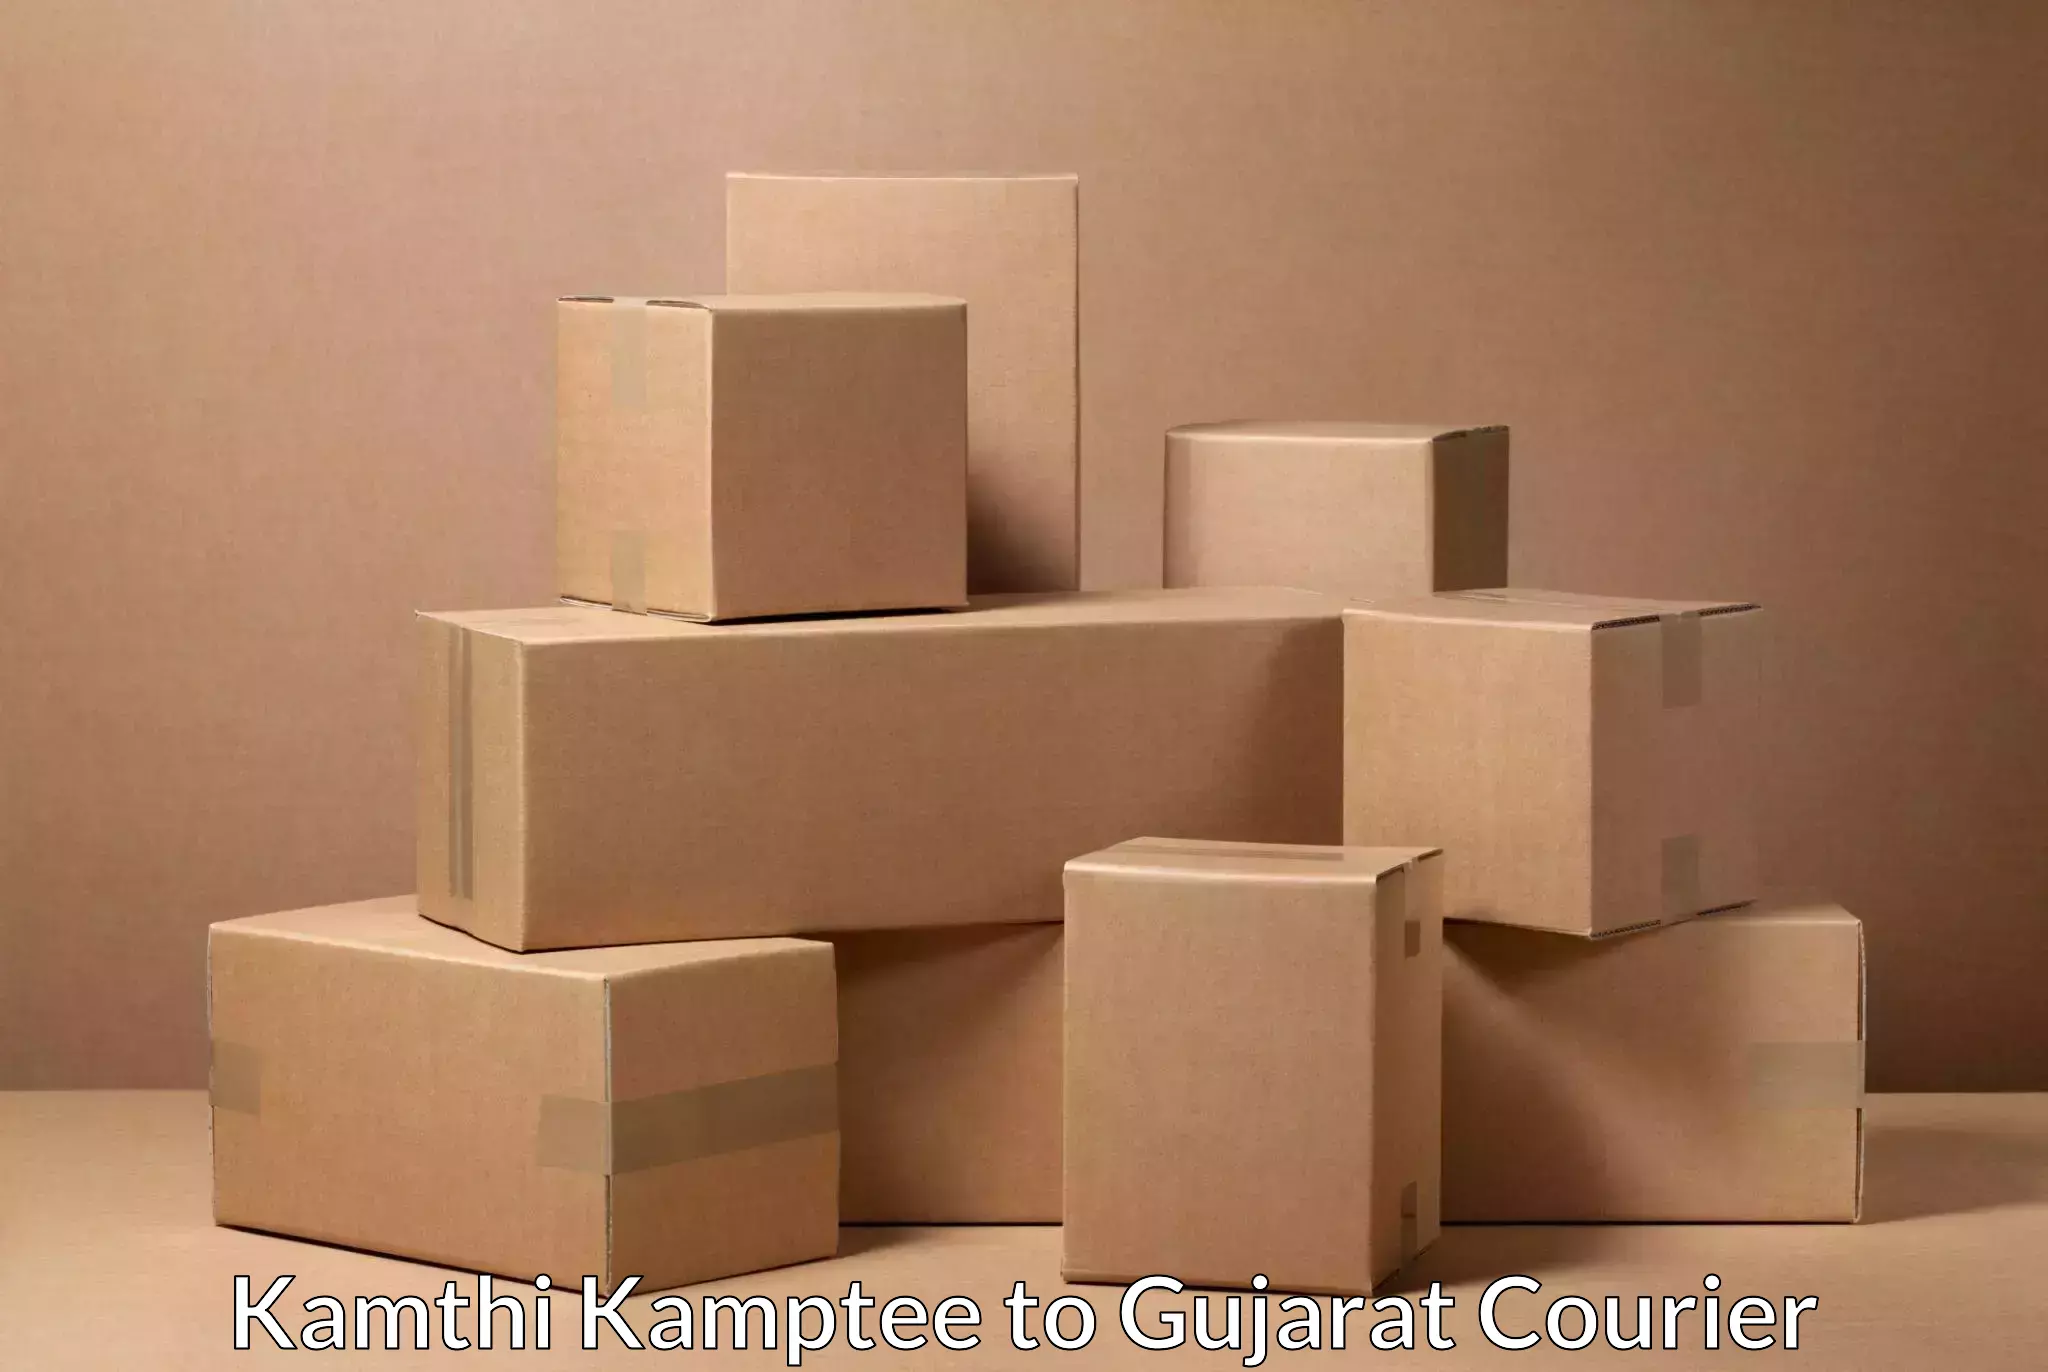 Efficient courier operations Kamthi Kamptee to Surat